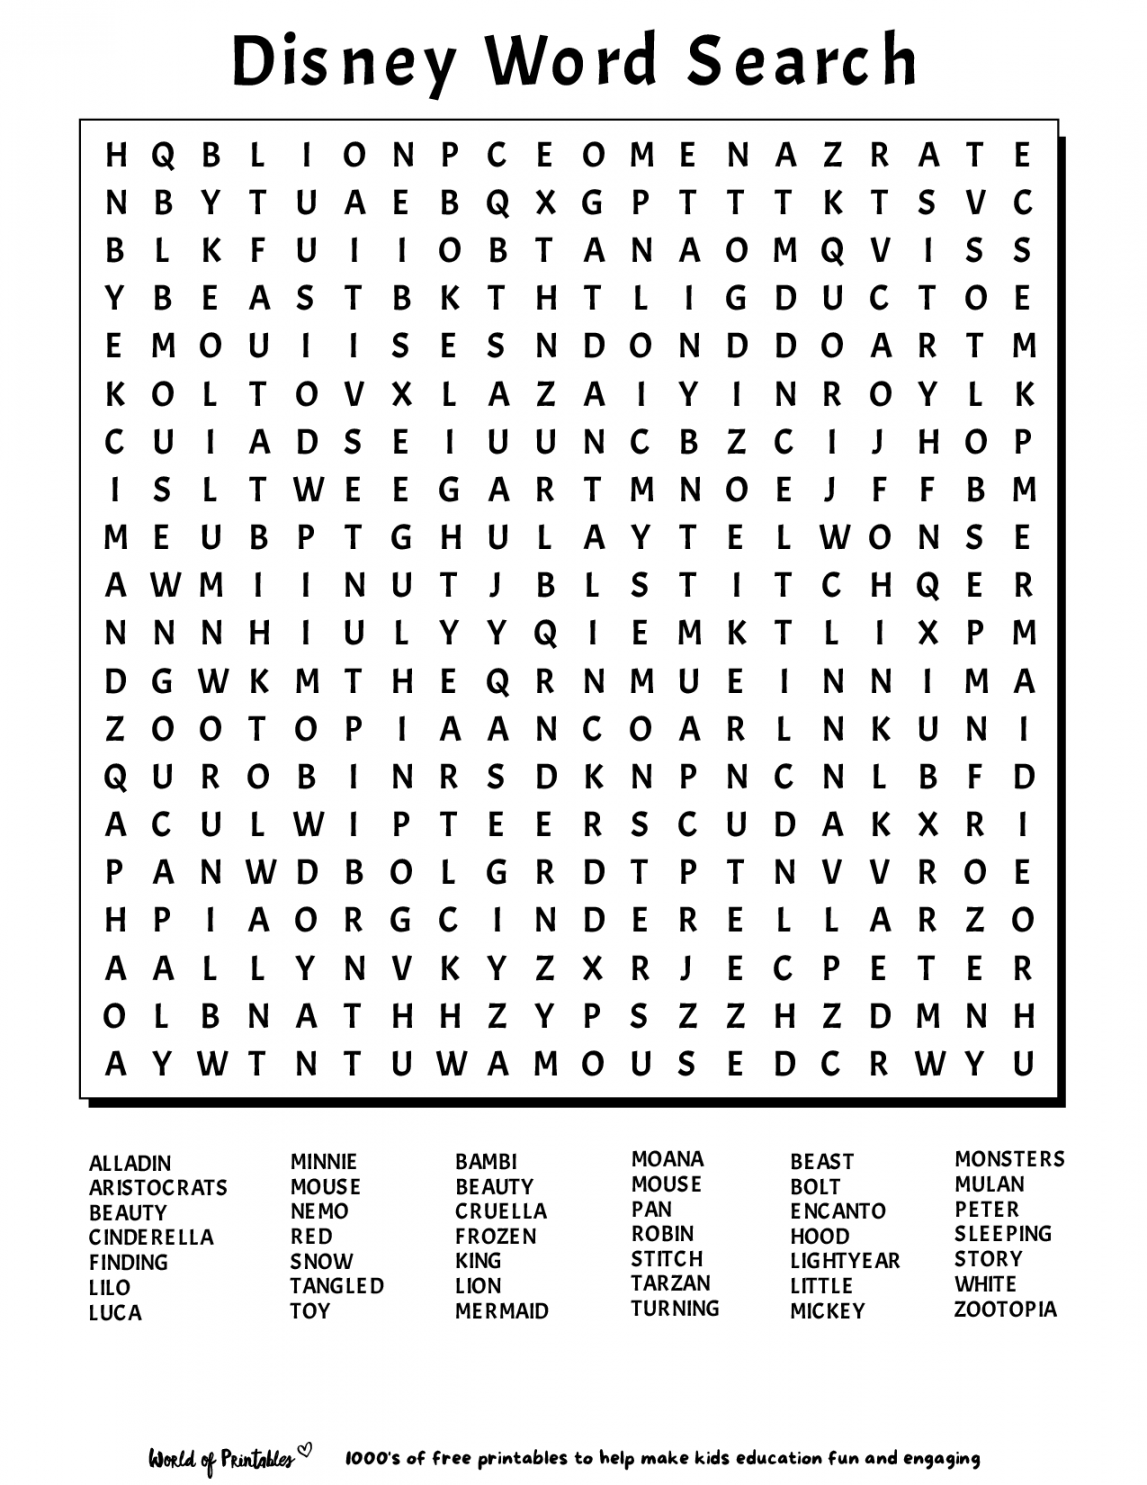 Free Word Search Puzzles Printable - Printable - Printable Word Search  World of Printables